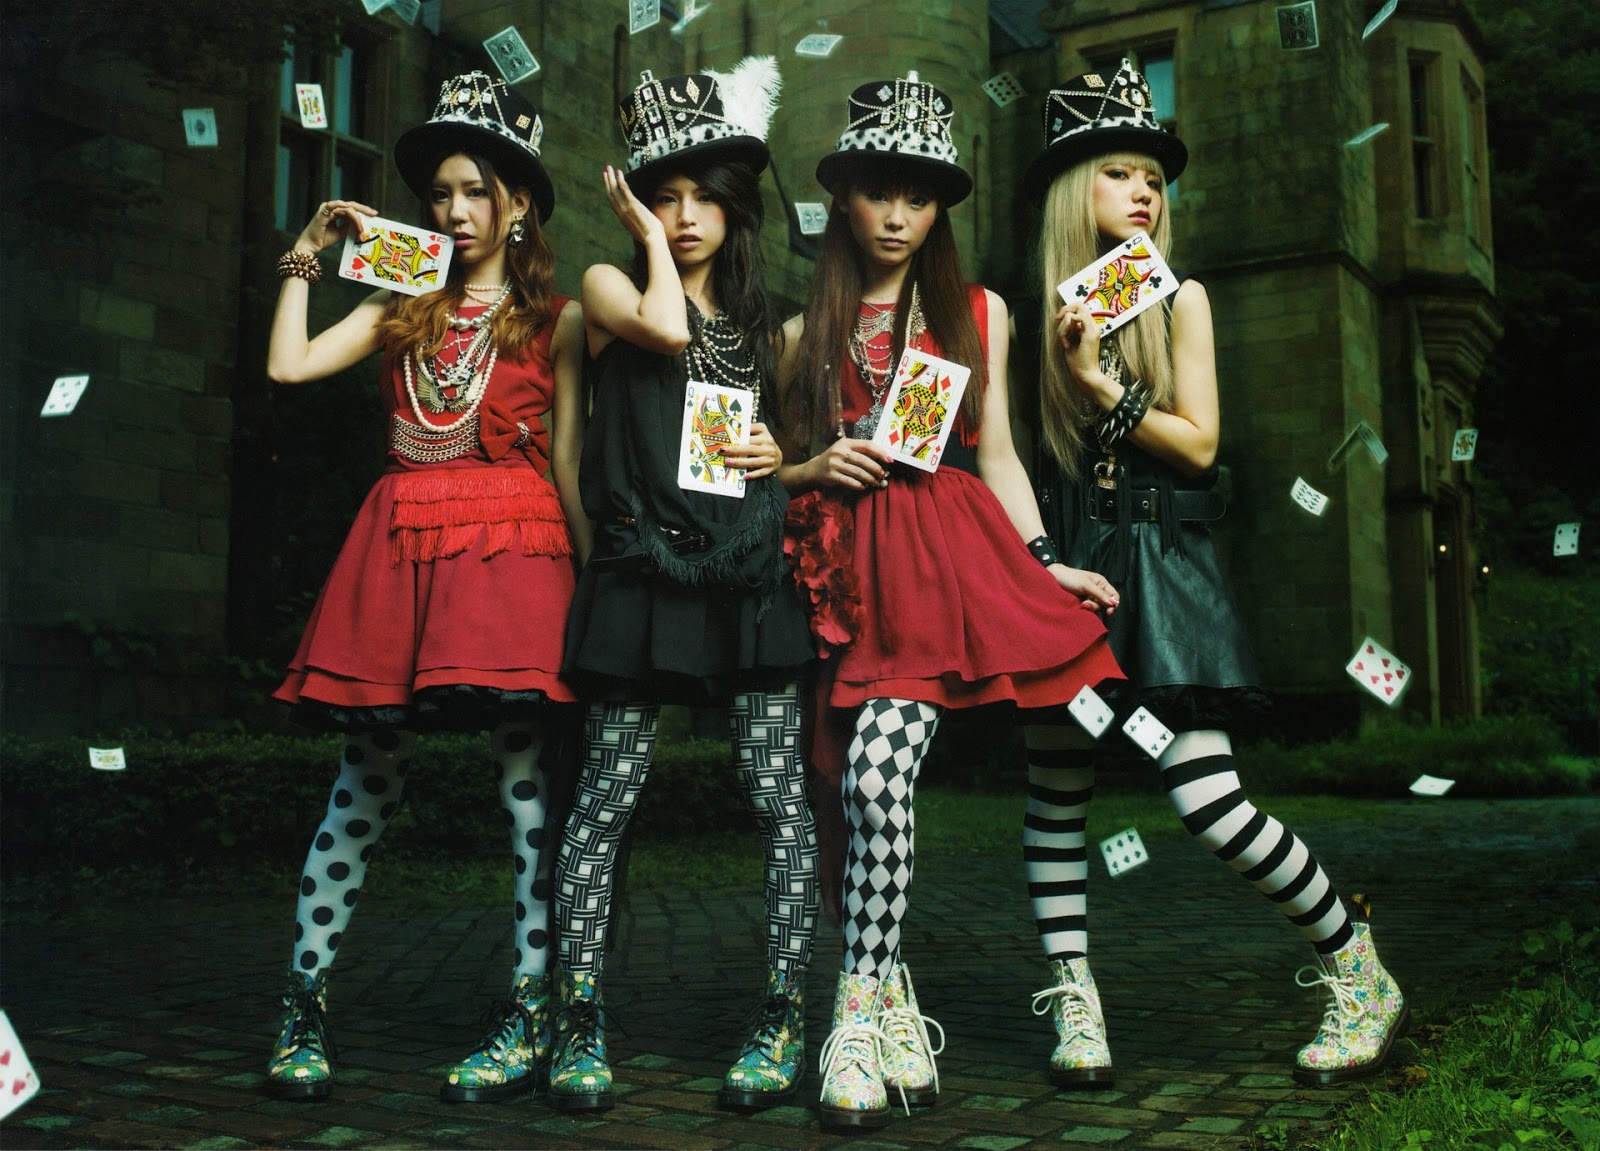 scandal band, images, image, wallpaper, photos, photo, photograph, gallery,...